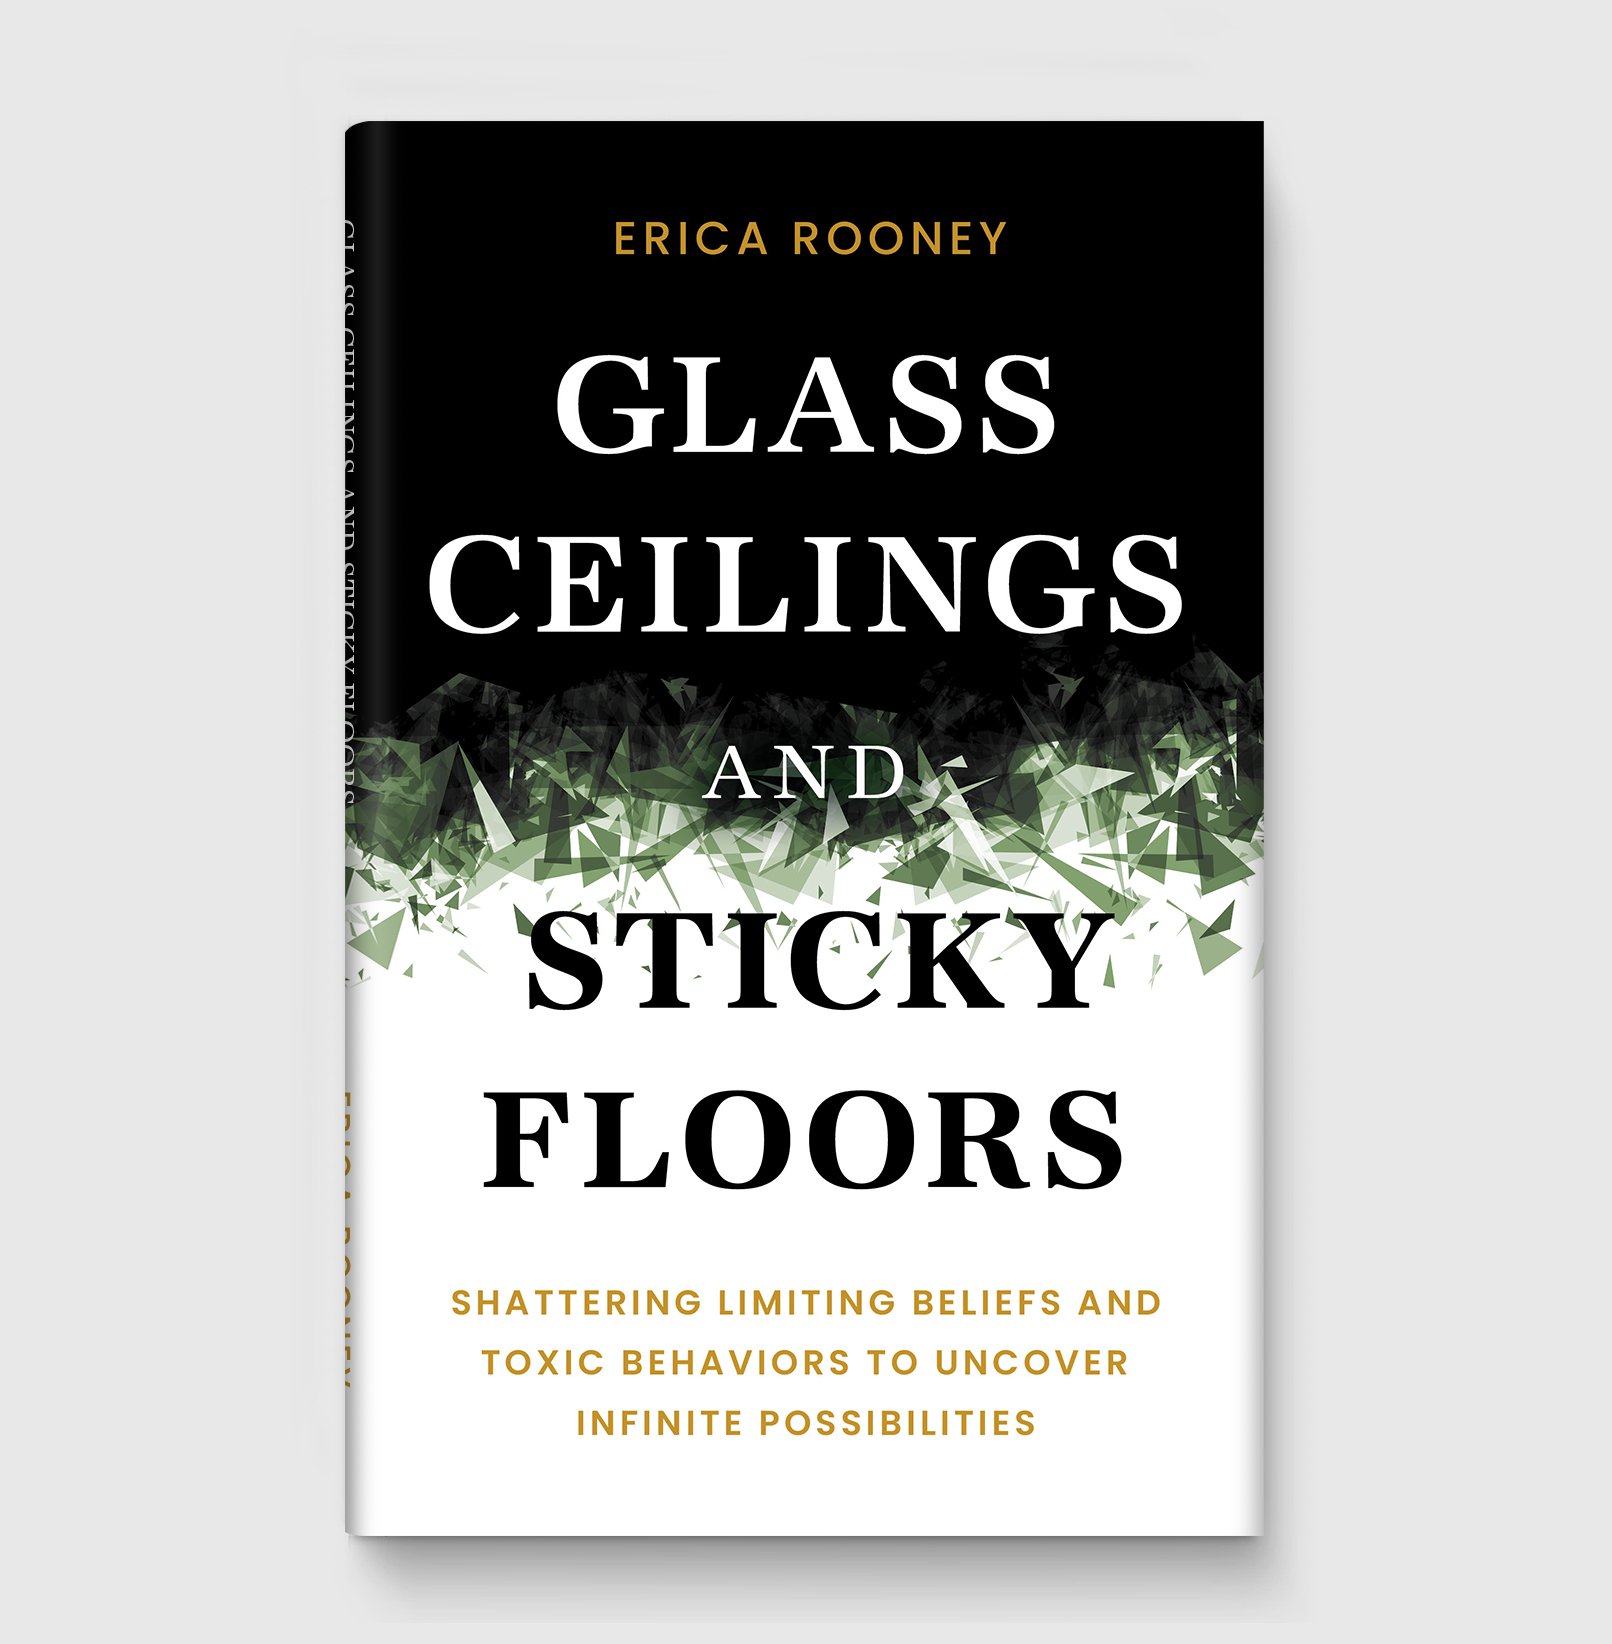 Glass Ceilings and Sticky Floors